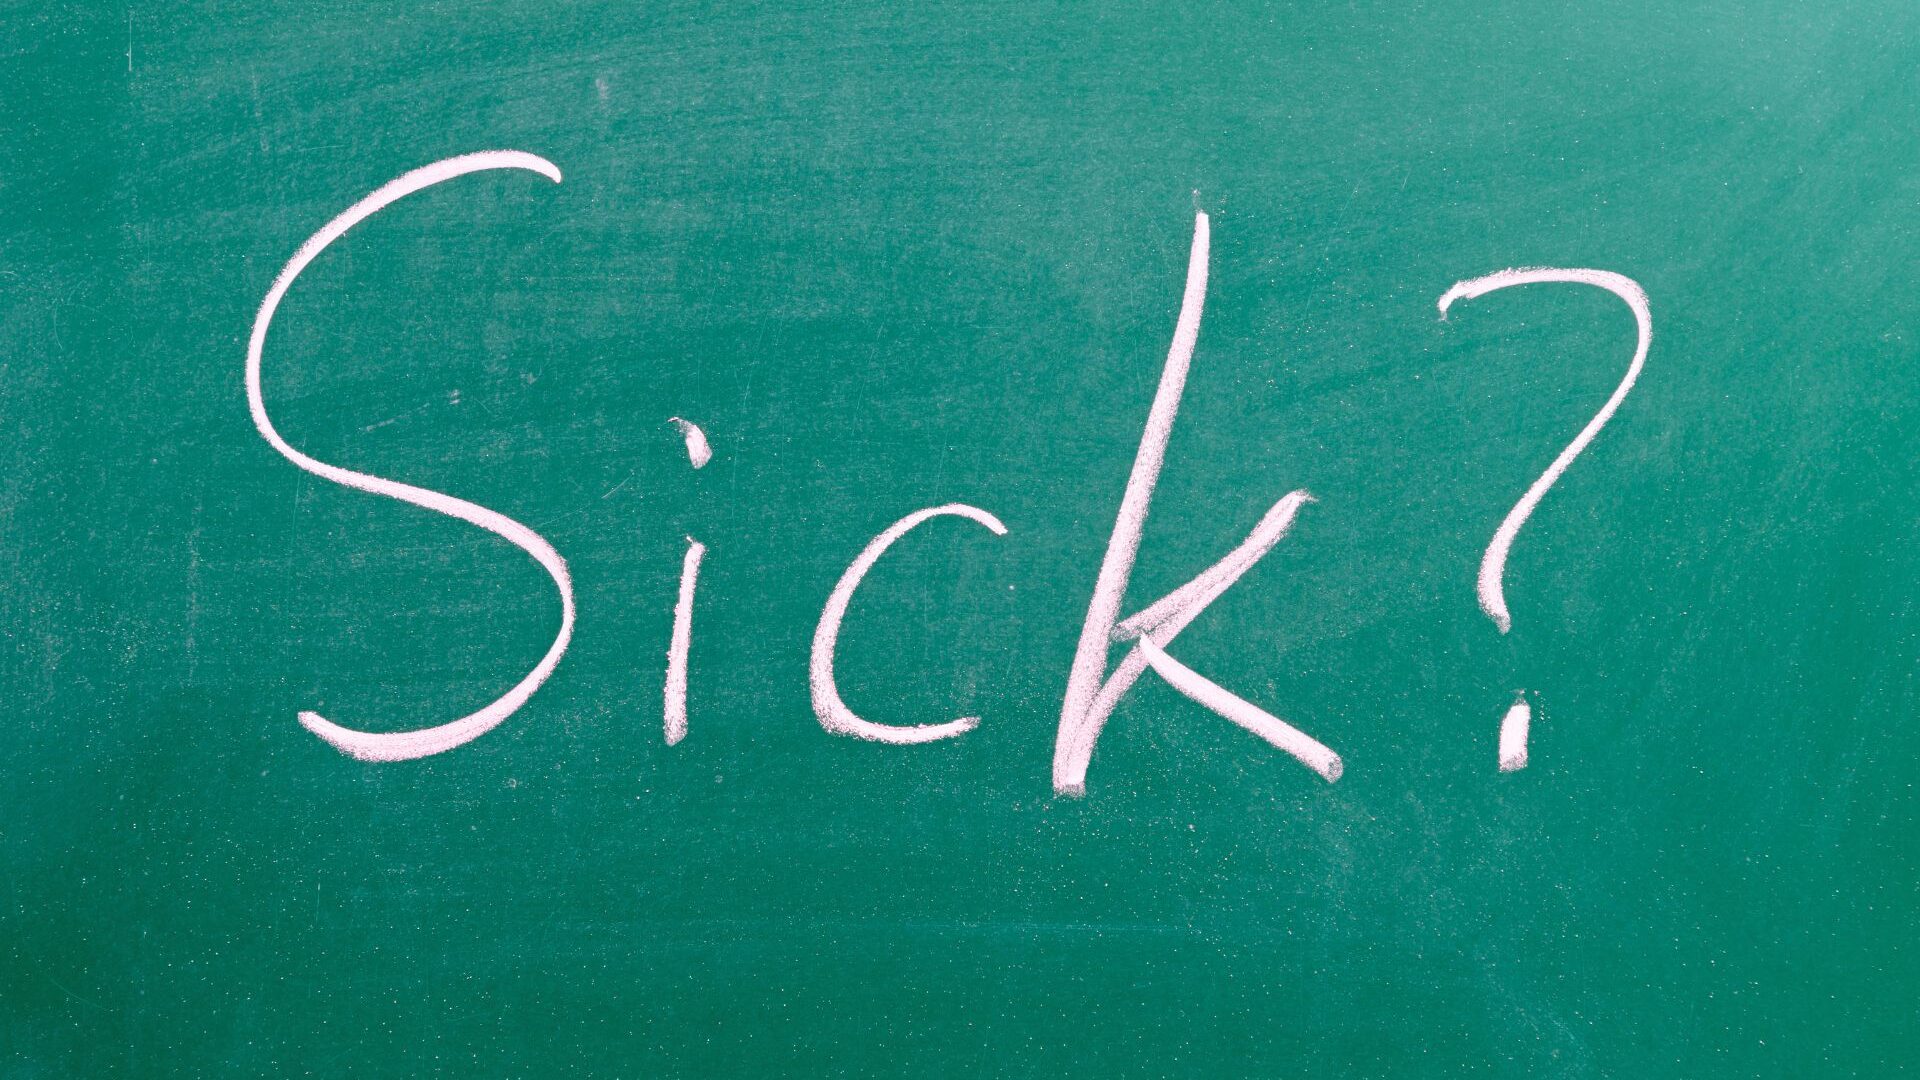 The word 'sick' and a question mark as written on a board.